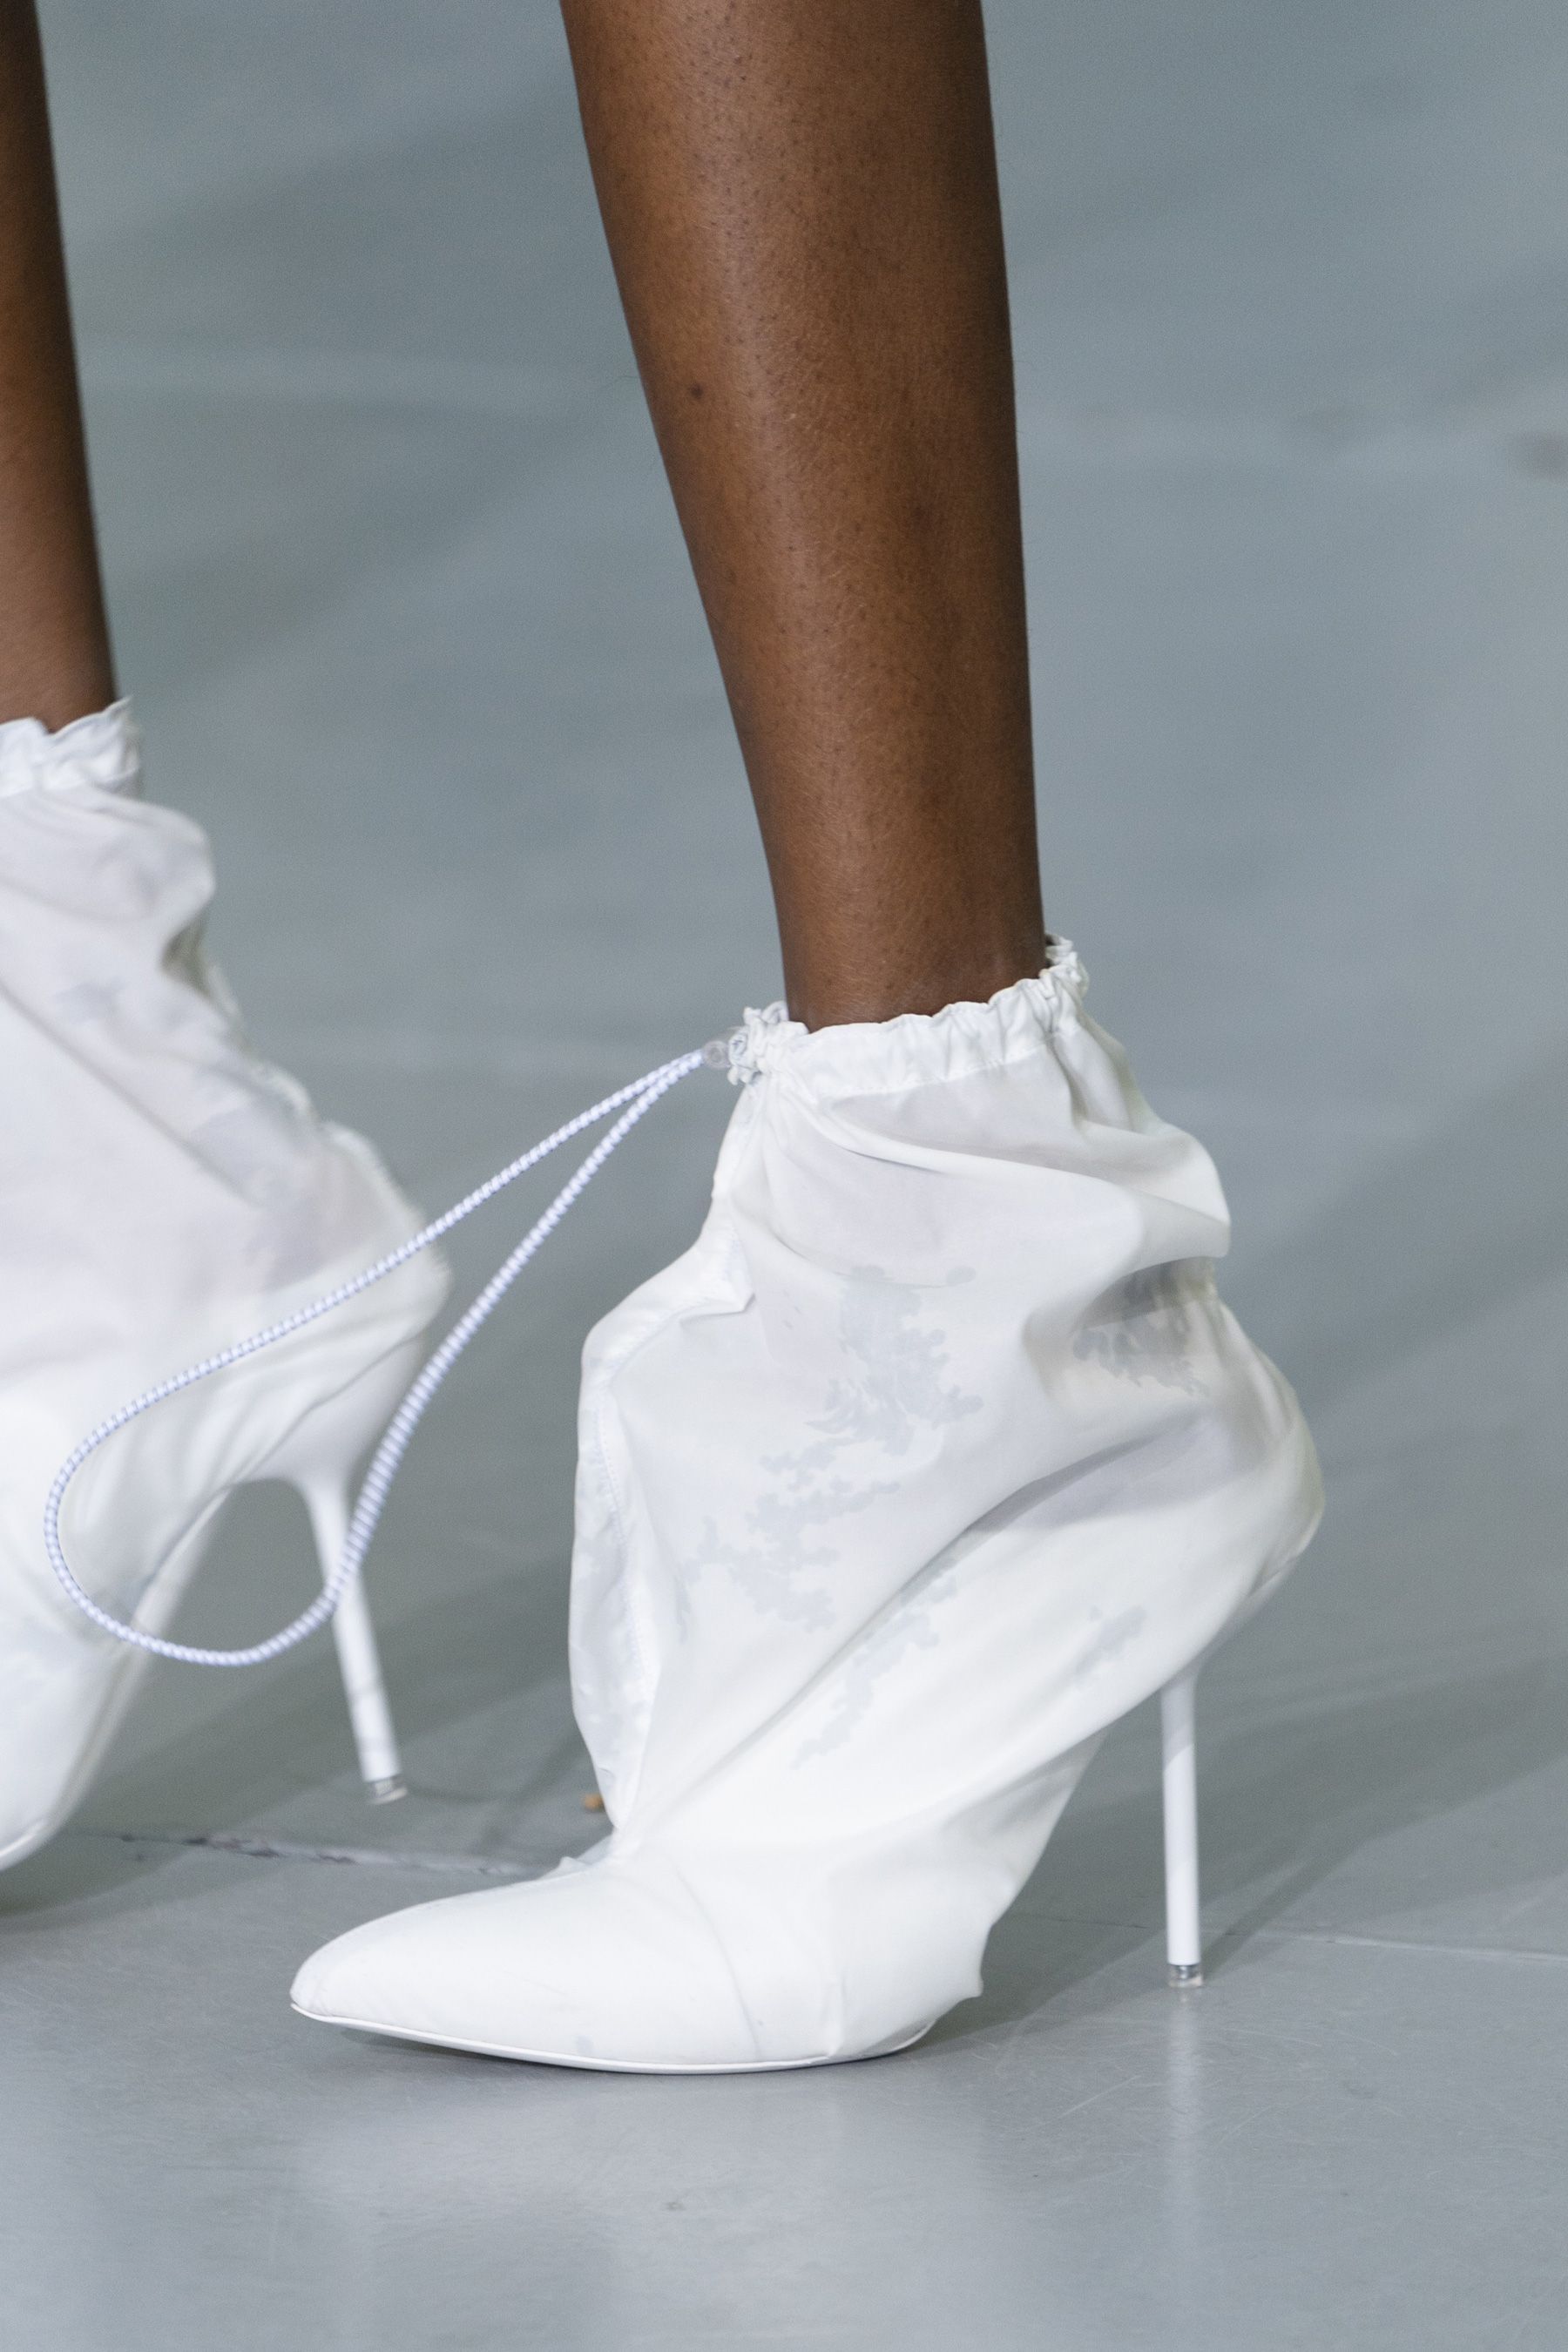 Best Shoes at Paris Fashion Week Fall 2019 | The Impression - Best Shoes at Paris Fashion Week Fall 2019 | The Impression -   17 style 2019 shoes ideas